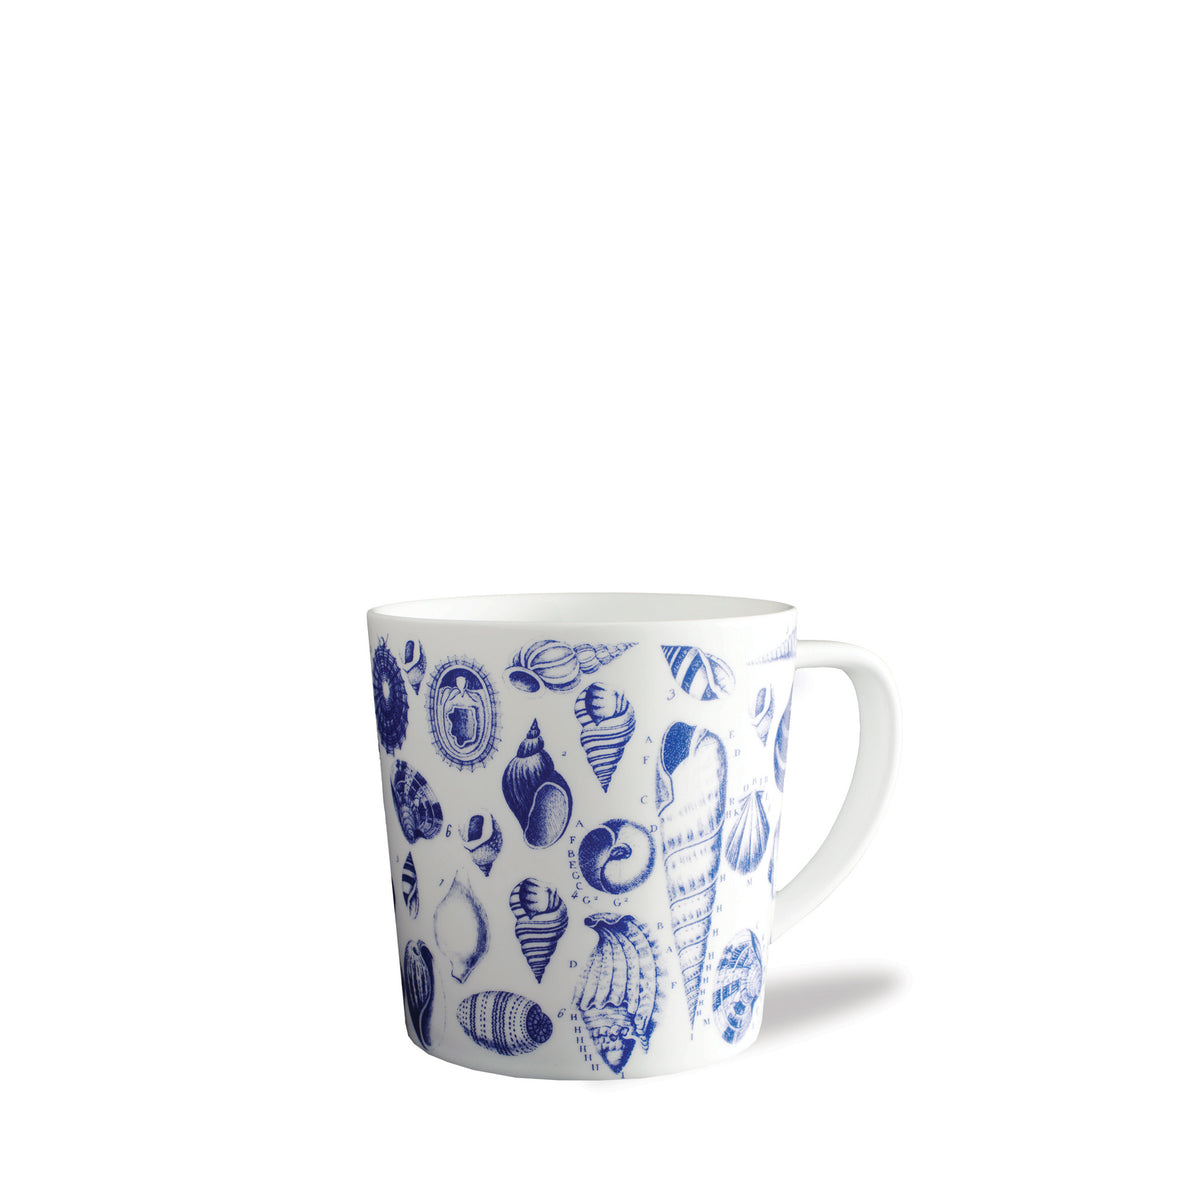 A Caskata Artisanal Home Shells Mug made of high-fired porcelain, featuring blue seashell and ocean-themed designs. This white ceramic marvel is also dishwasher safe.